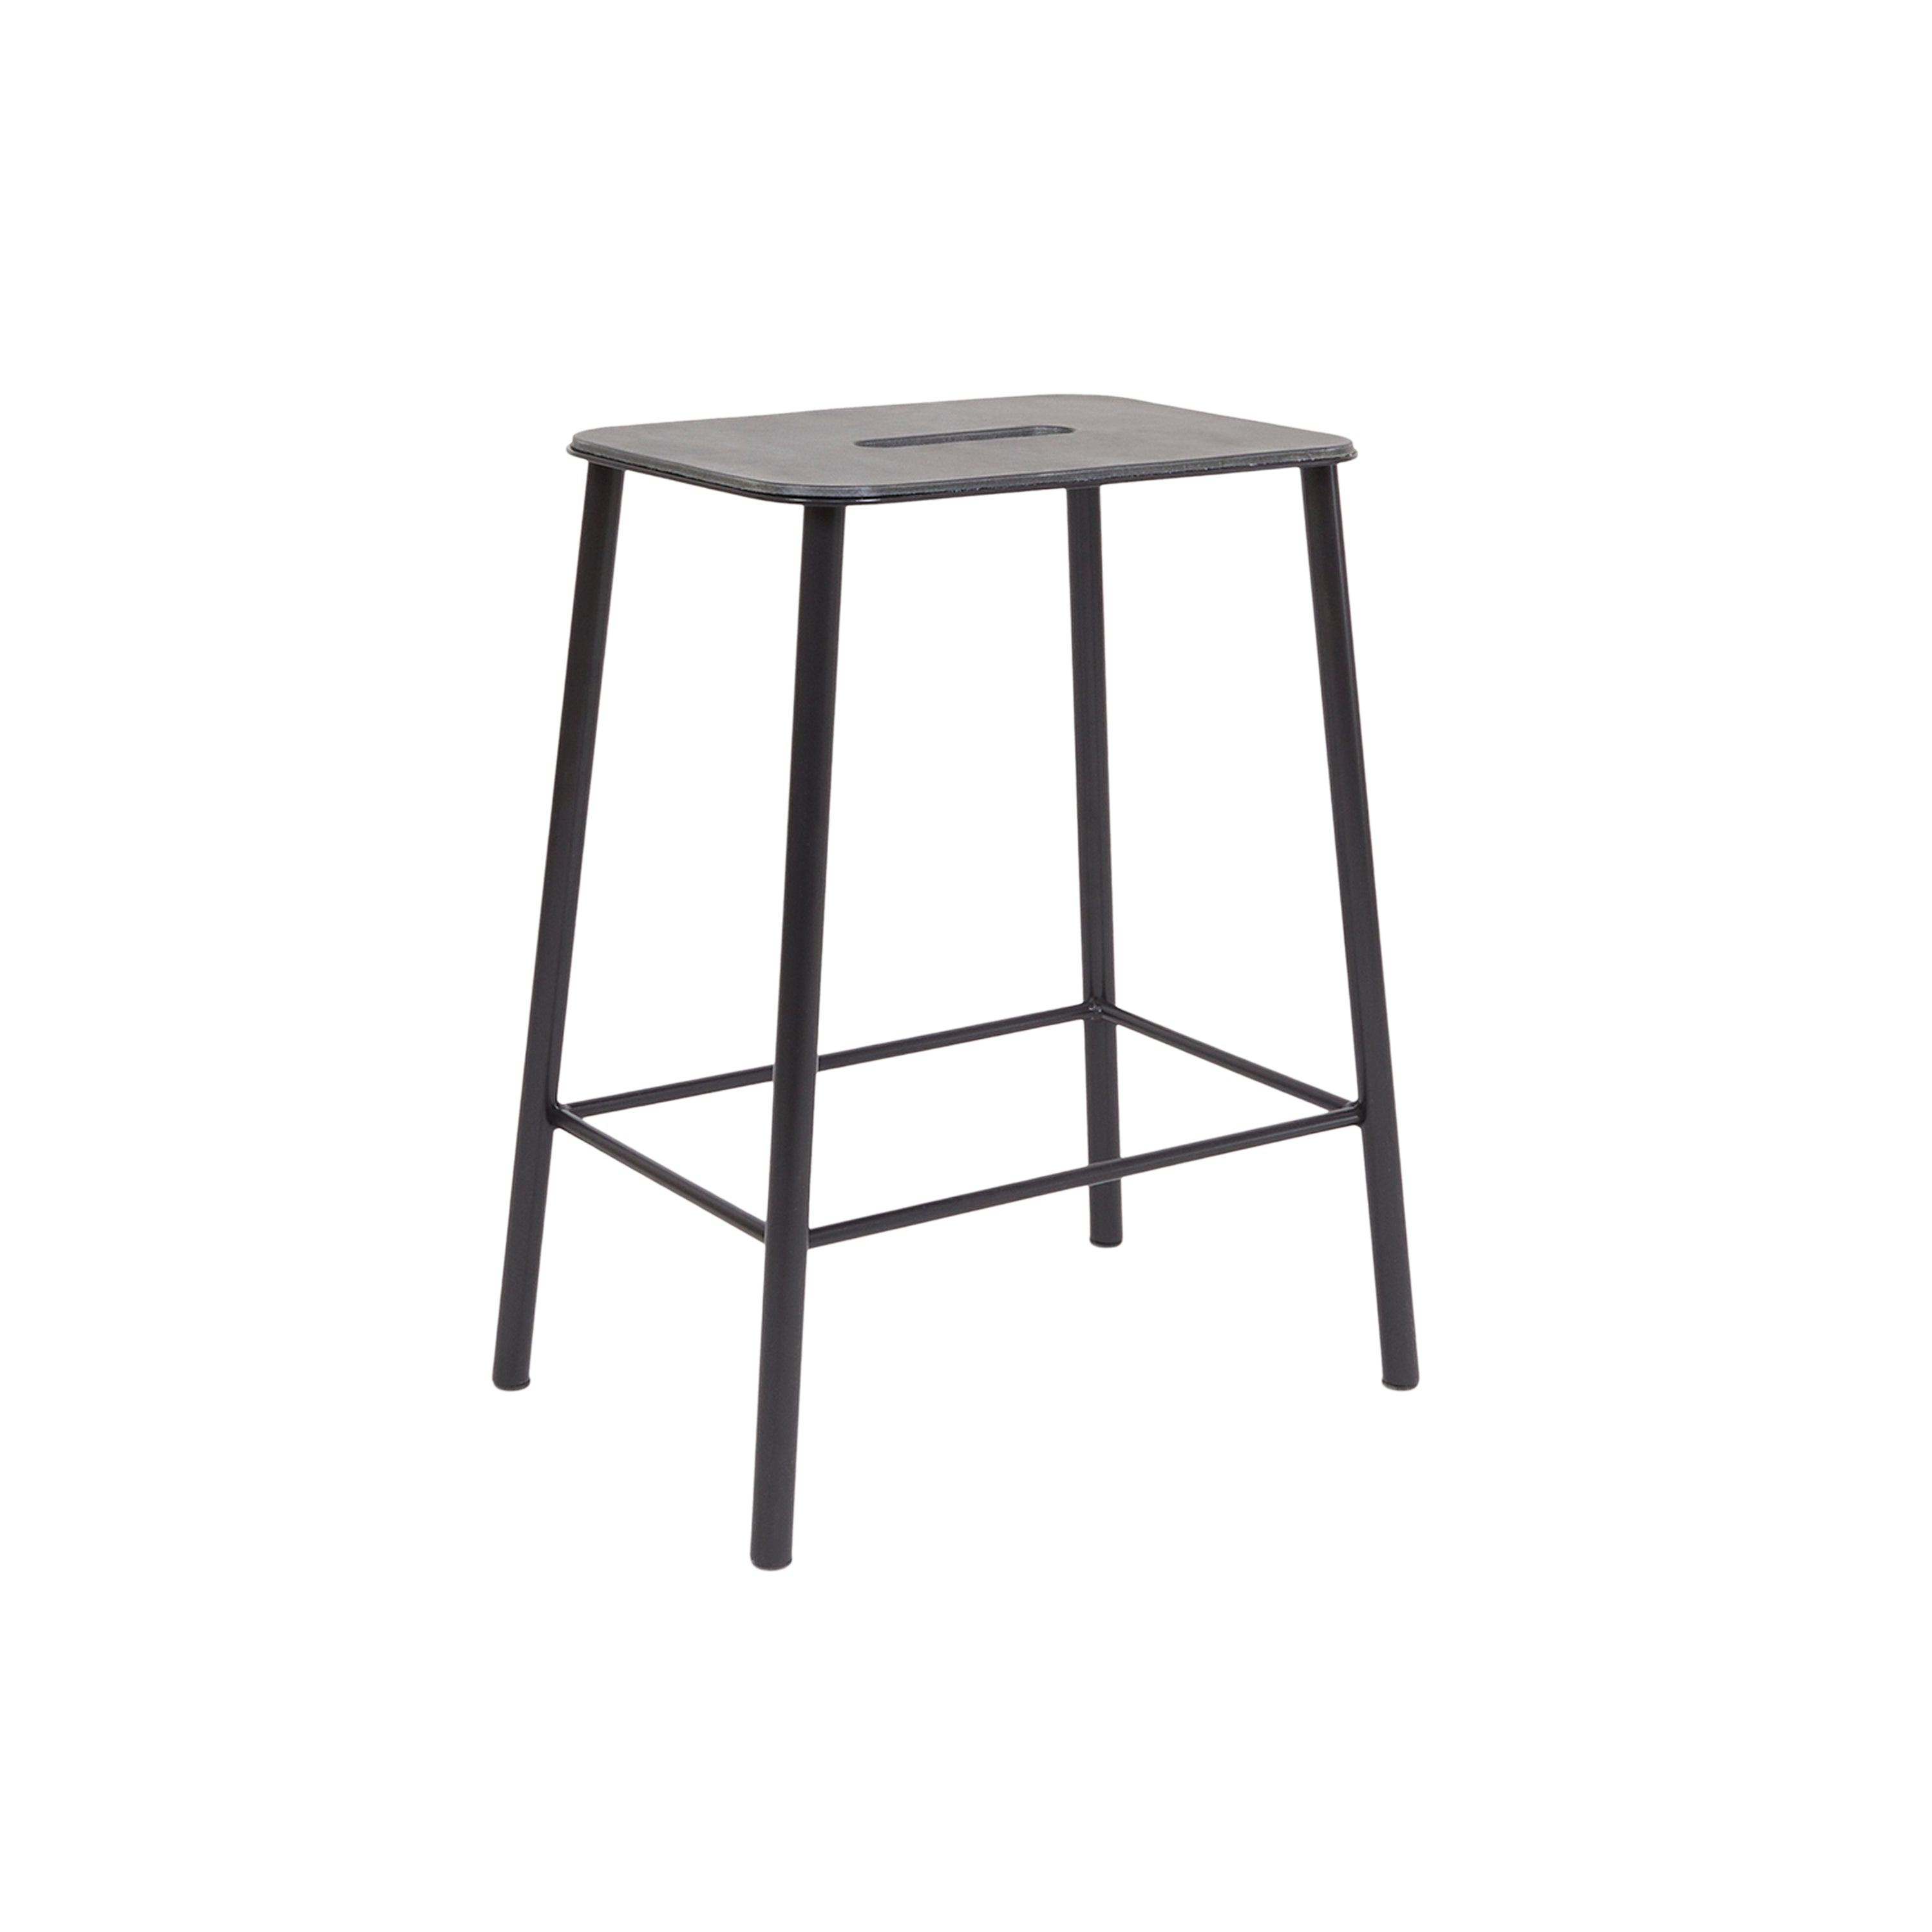 Adam Stool: Upholstered + Dining + Black + Anthracite Leather